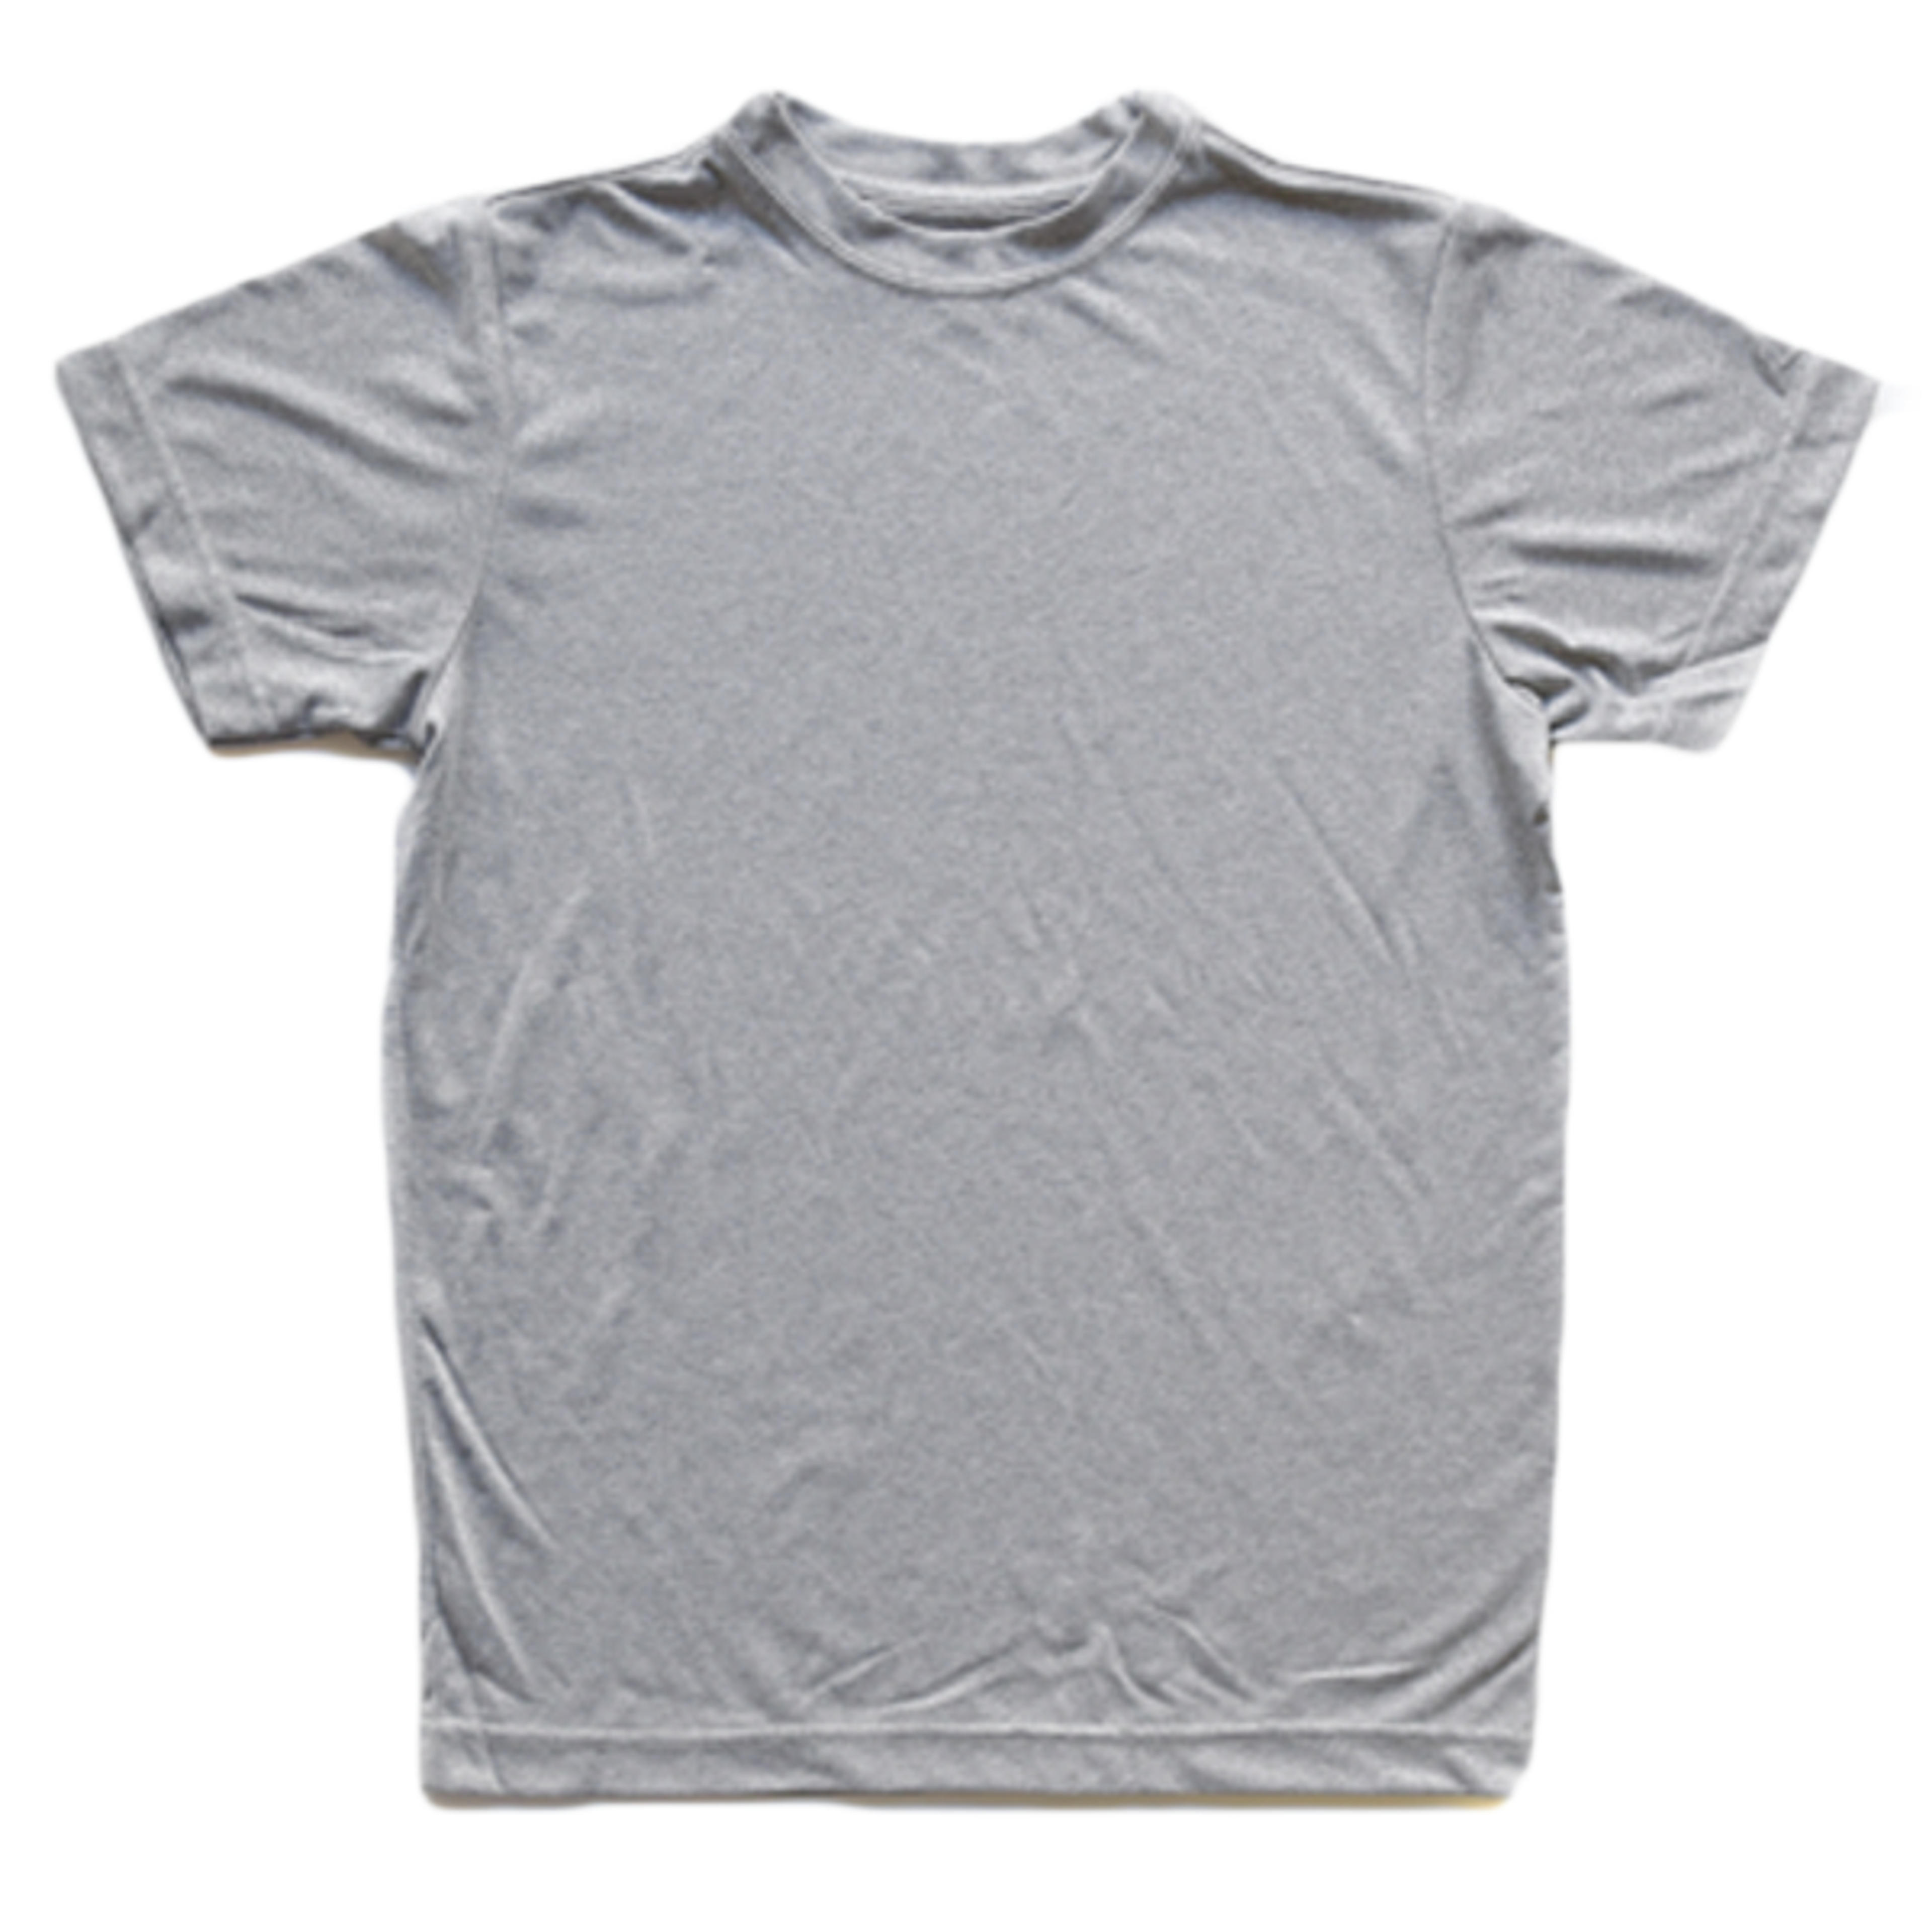 Recover - Sport Kid's T-Shirt - 1